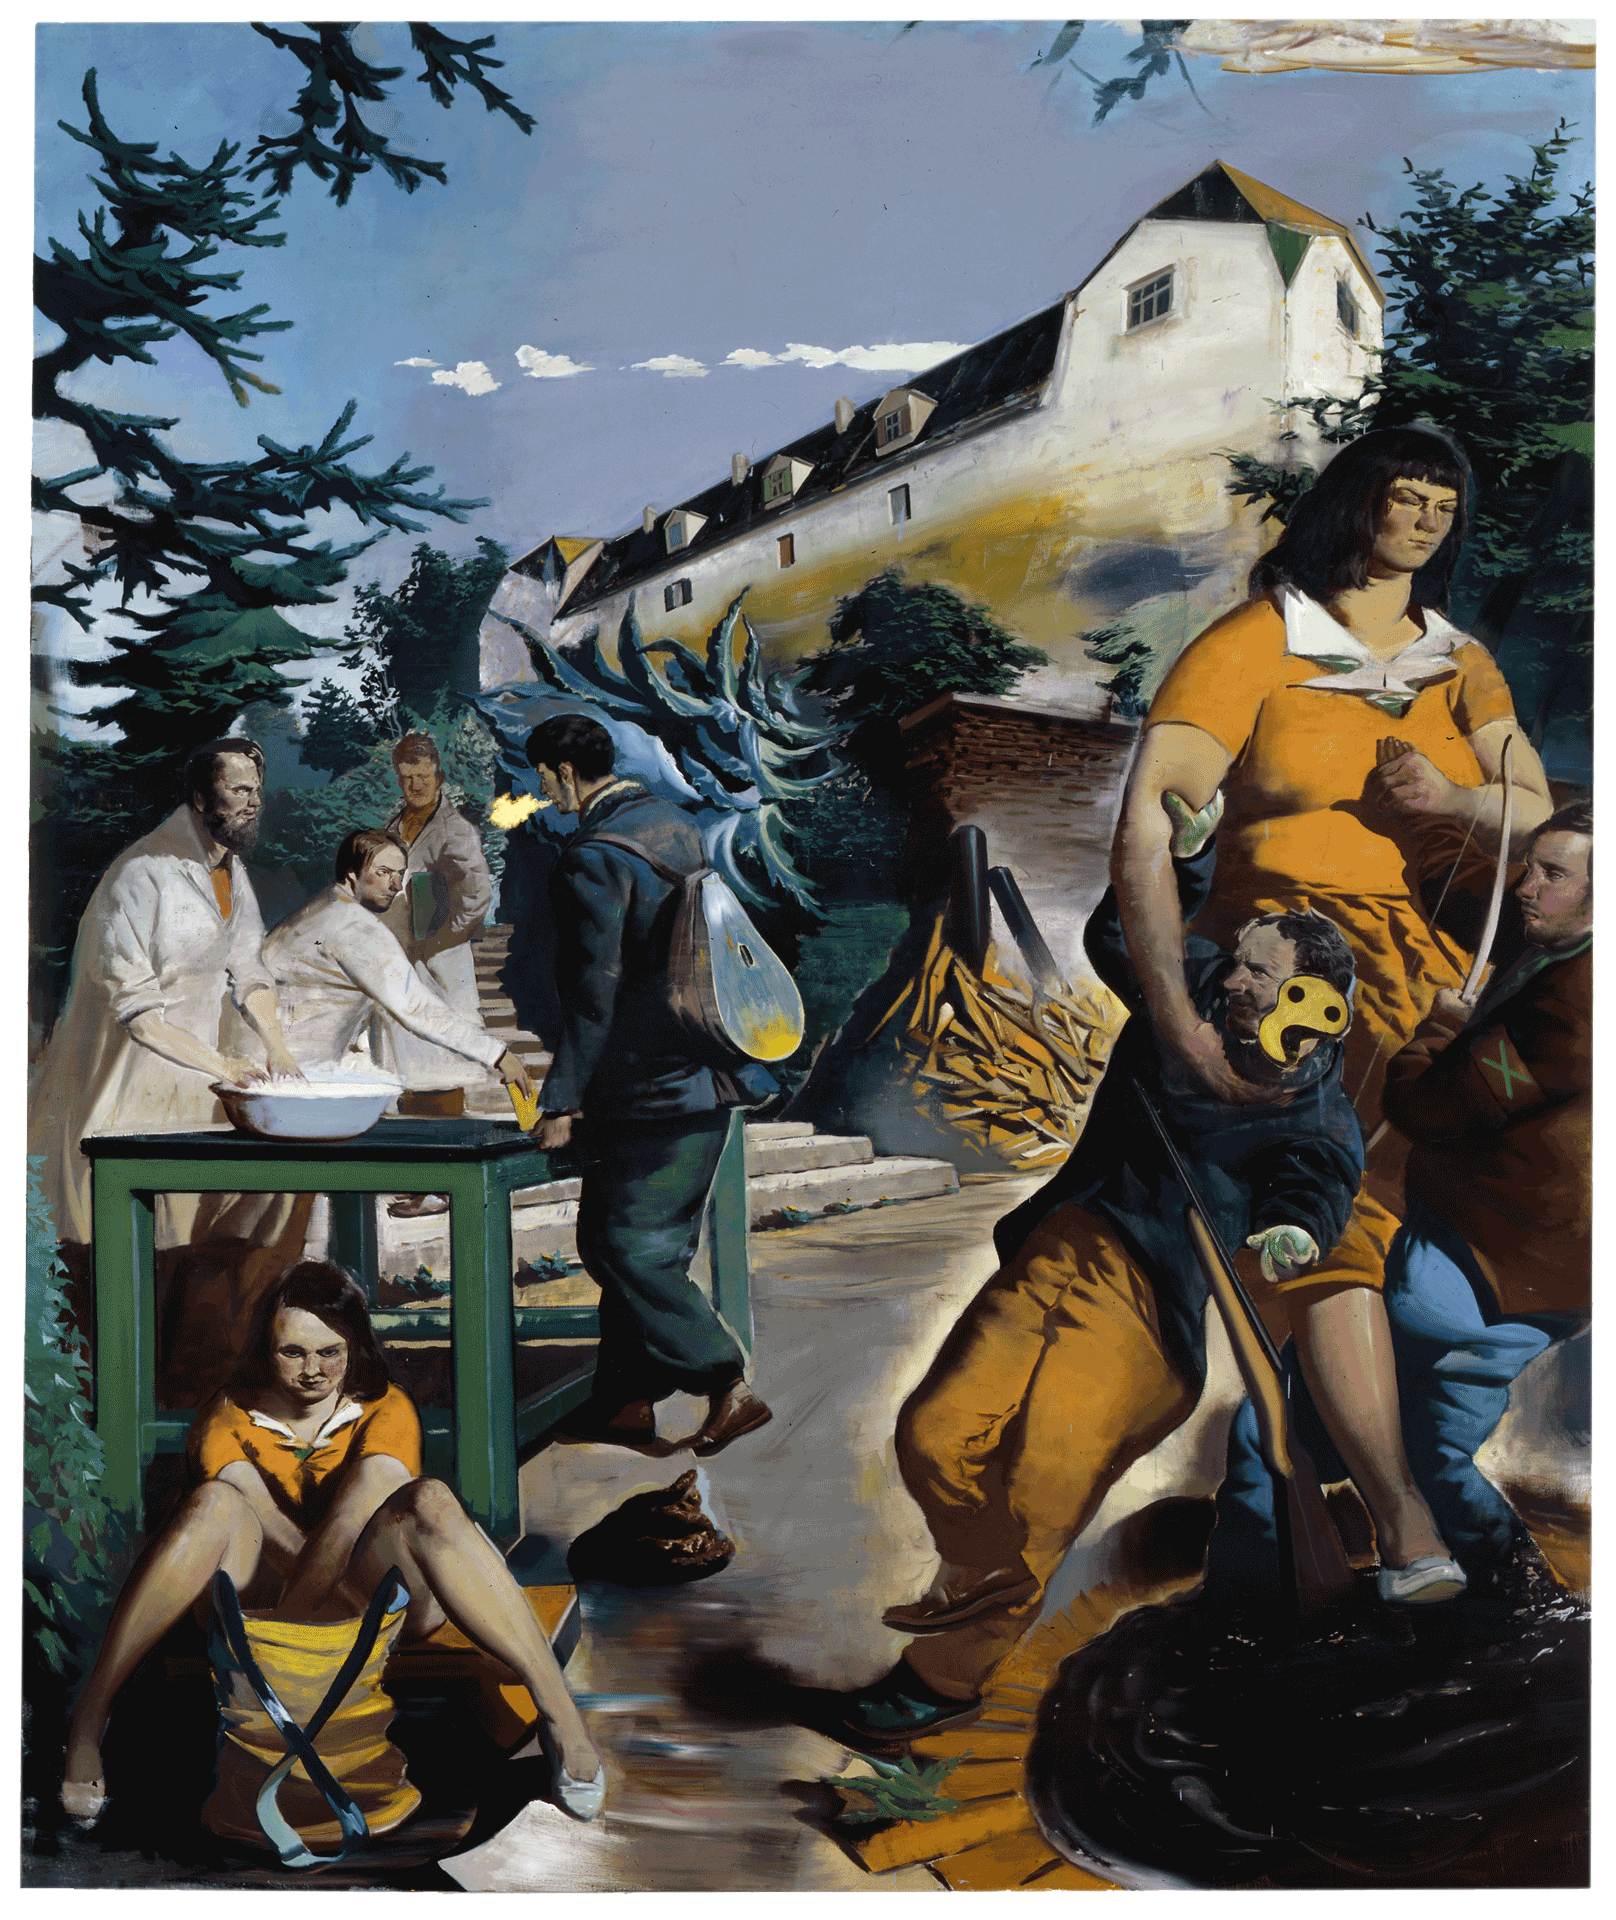 A painting by Neo Rauch, titled Die Aufnahme, dated 2008.